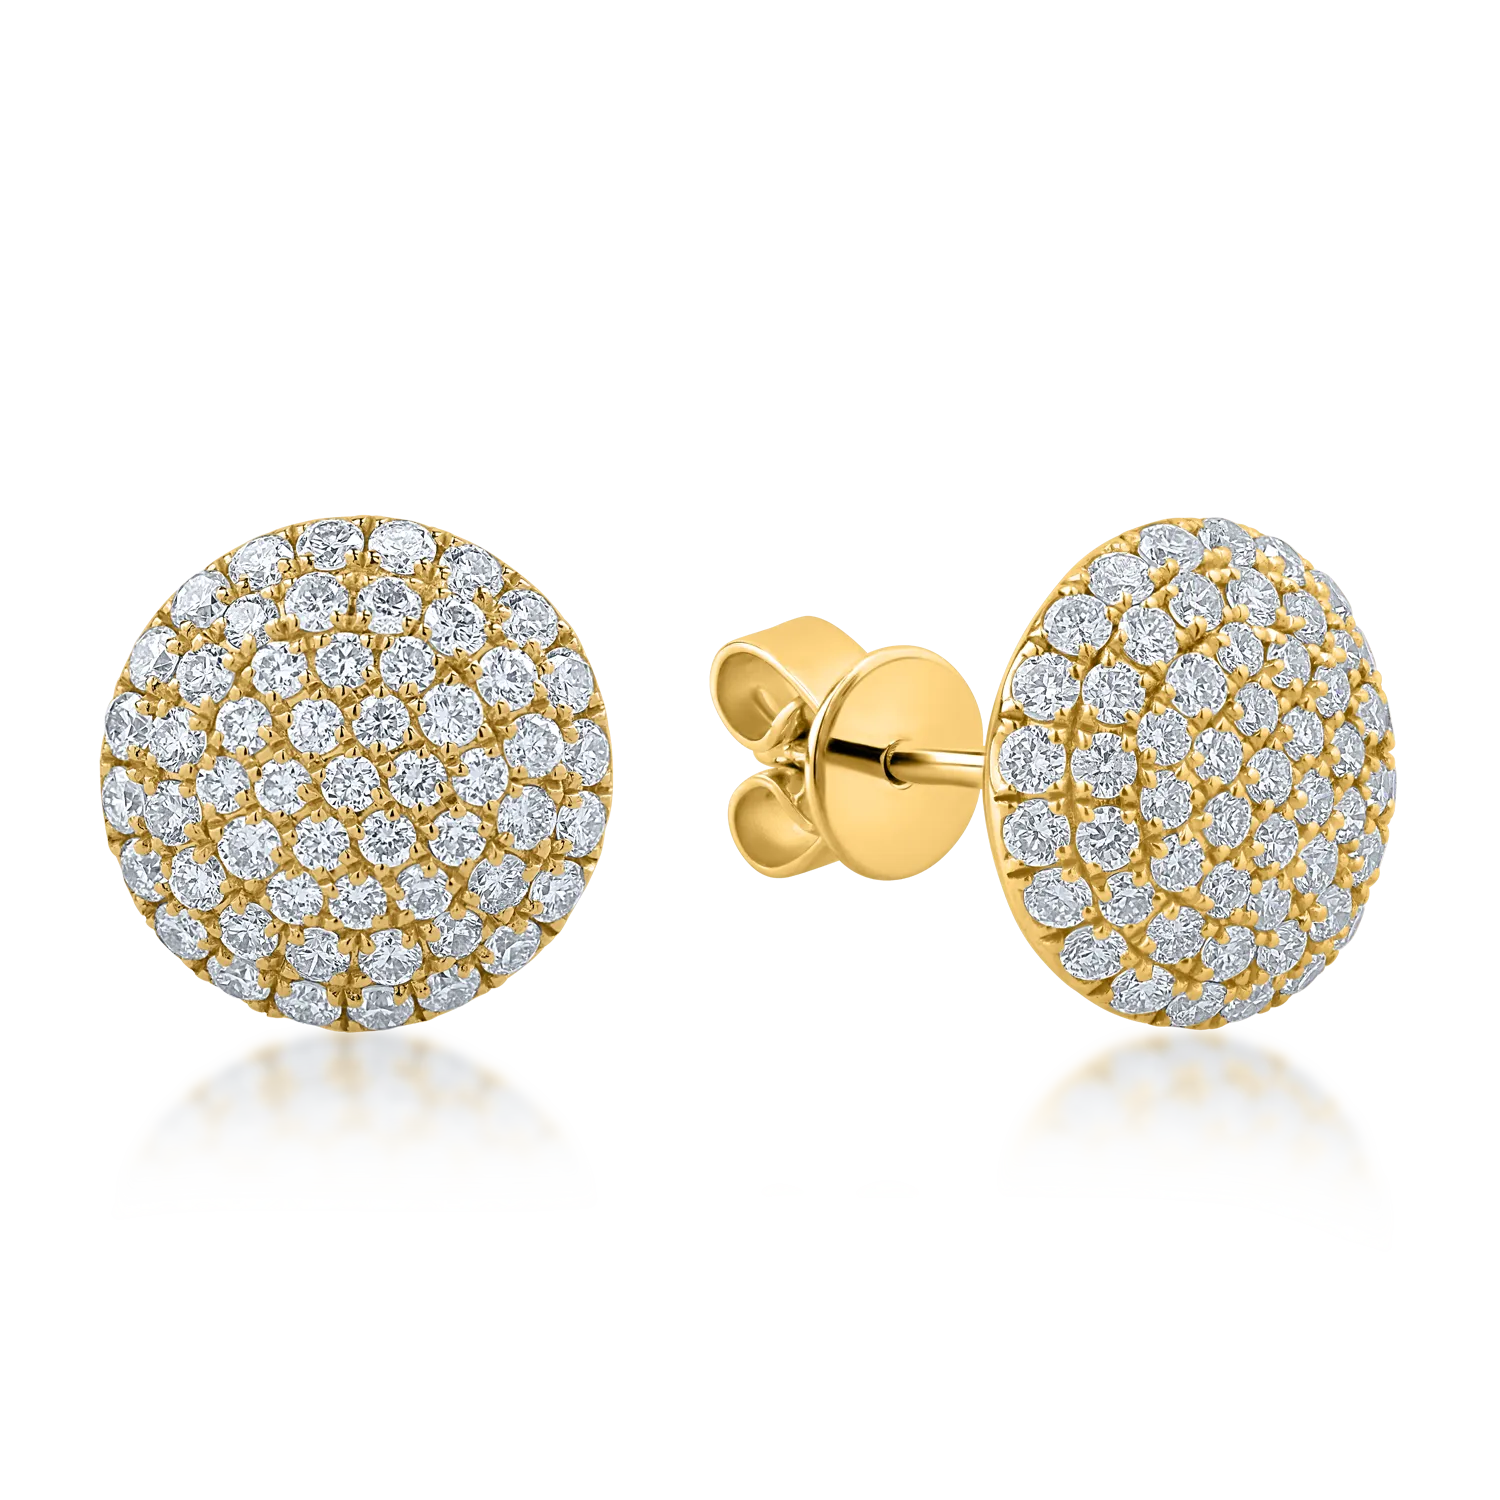 Yellow gold earrings with 1.01ct diamonds